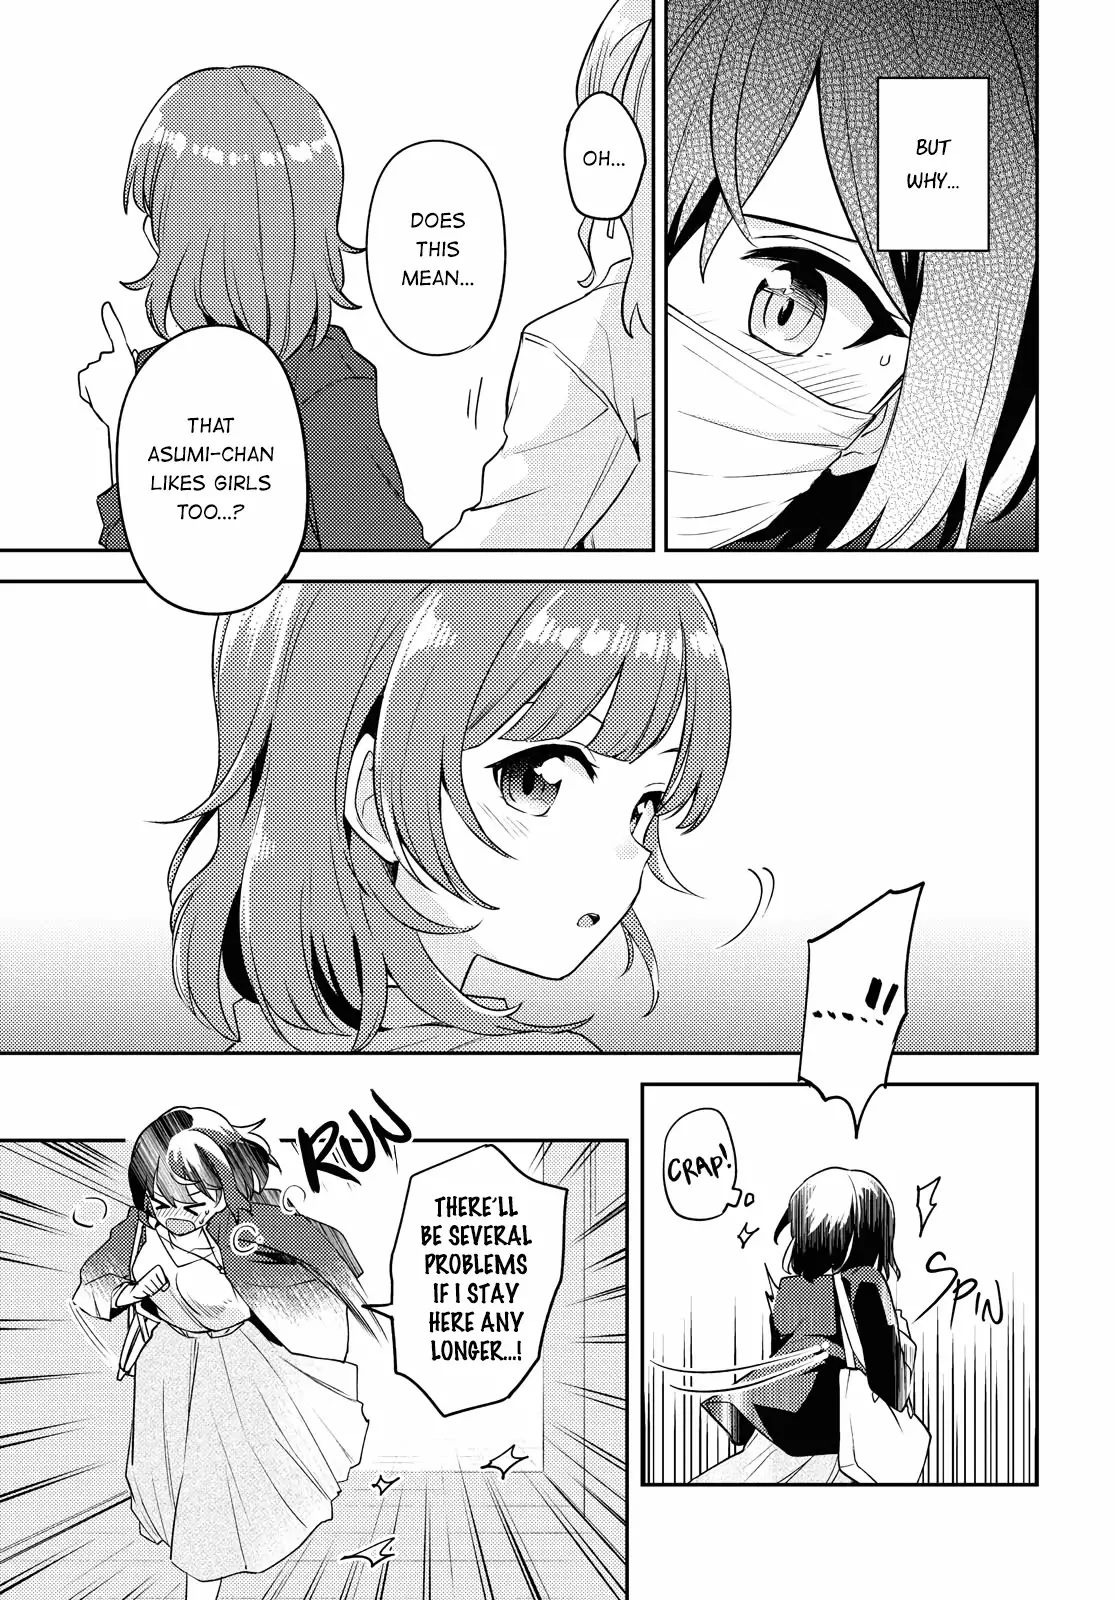 Asumi-Chan Is Interested In Lesbian Brothels! - 5 page 25